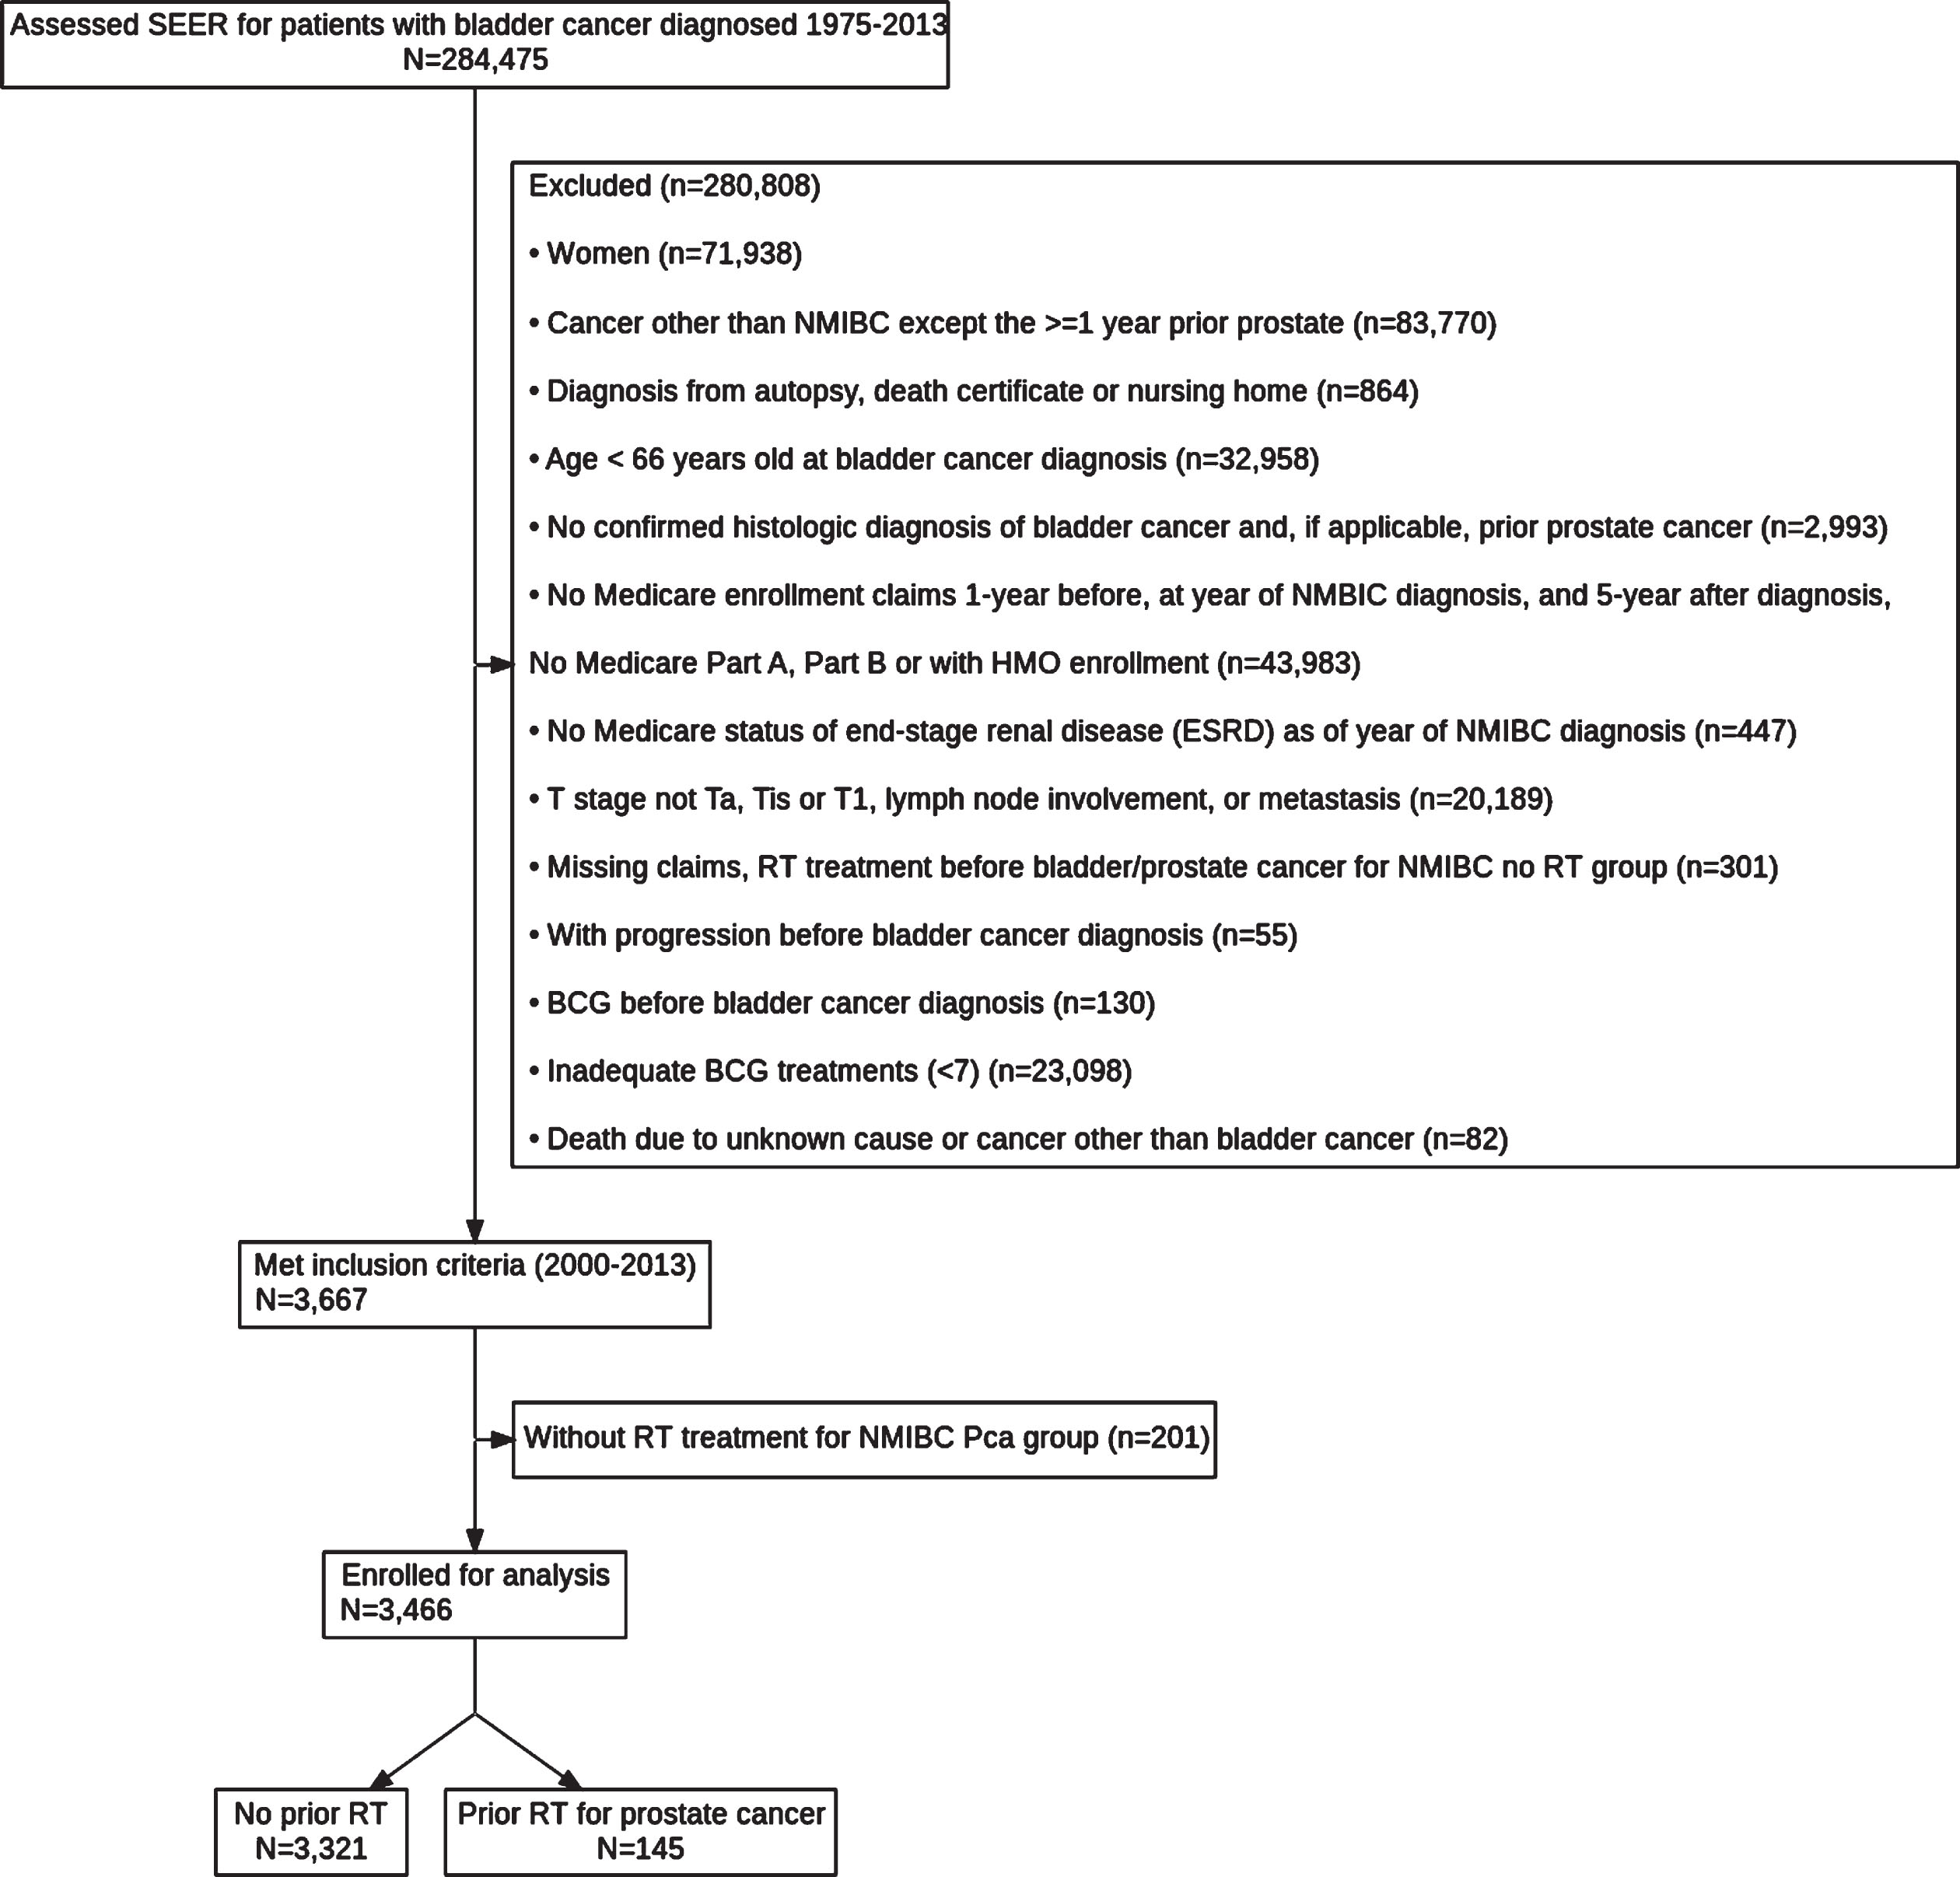 Flowchart for Identifying Patients in SEER Database with NMIBC and Adequate BCG Therapy With and Without a History of RT for Prostate Cancer. BCG indicates bacille Calmette-Guérin; ESRD, end-stage renal disease; HMO, health maintenance organization; NMIBC, non–muscle-invasive bladder cancer; RT, radiation therapy; SEER, Surveillance Epidemiology and End Results.